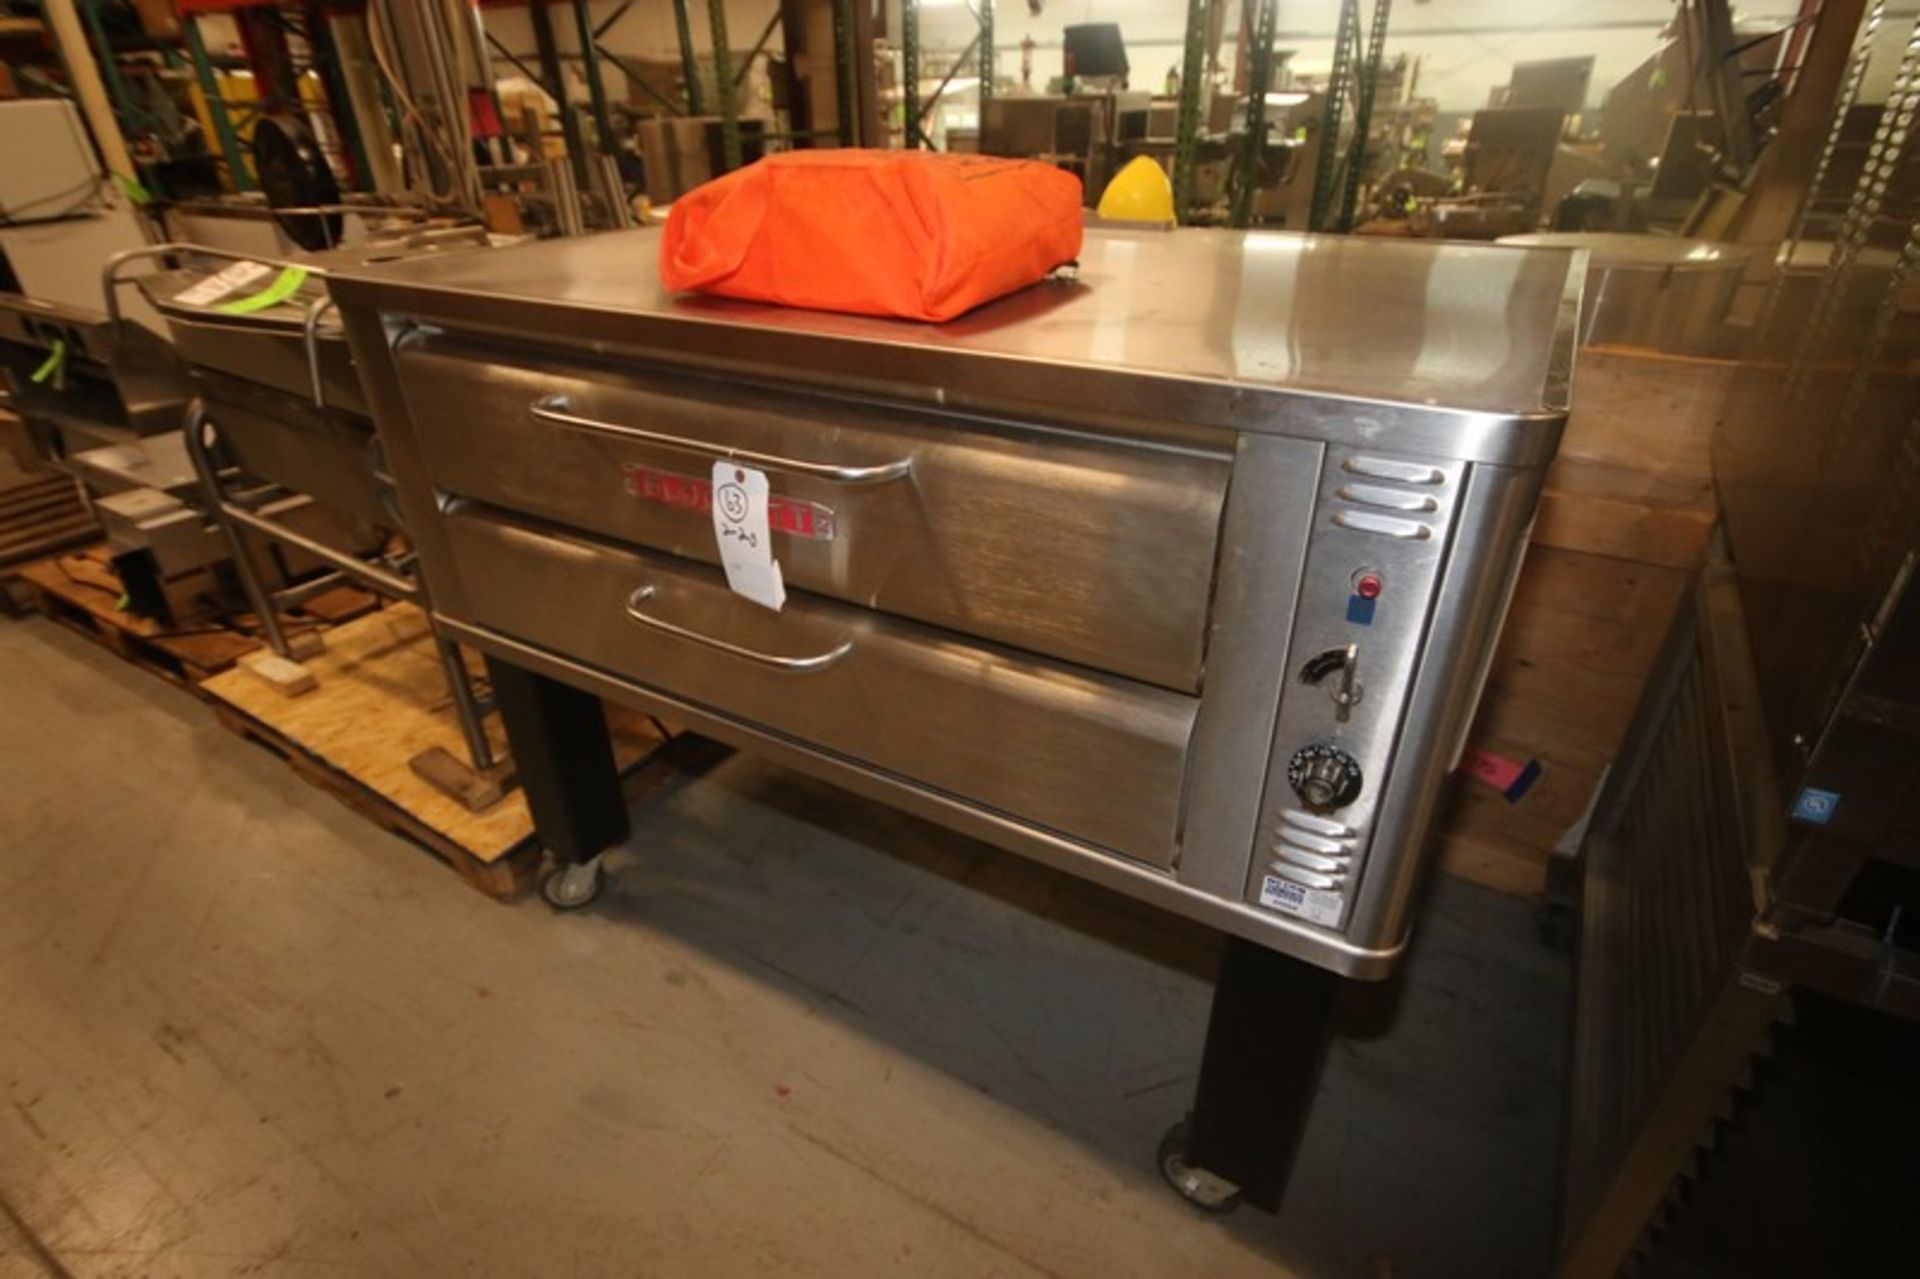 Blodgett Pizza Oven,M/N 961-P, S/N 091409AJ0055, with (2) Levels with S/S Covers, with Fire Blanket,